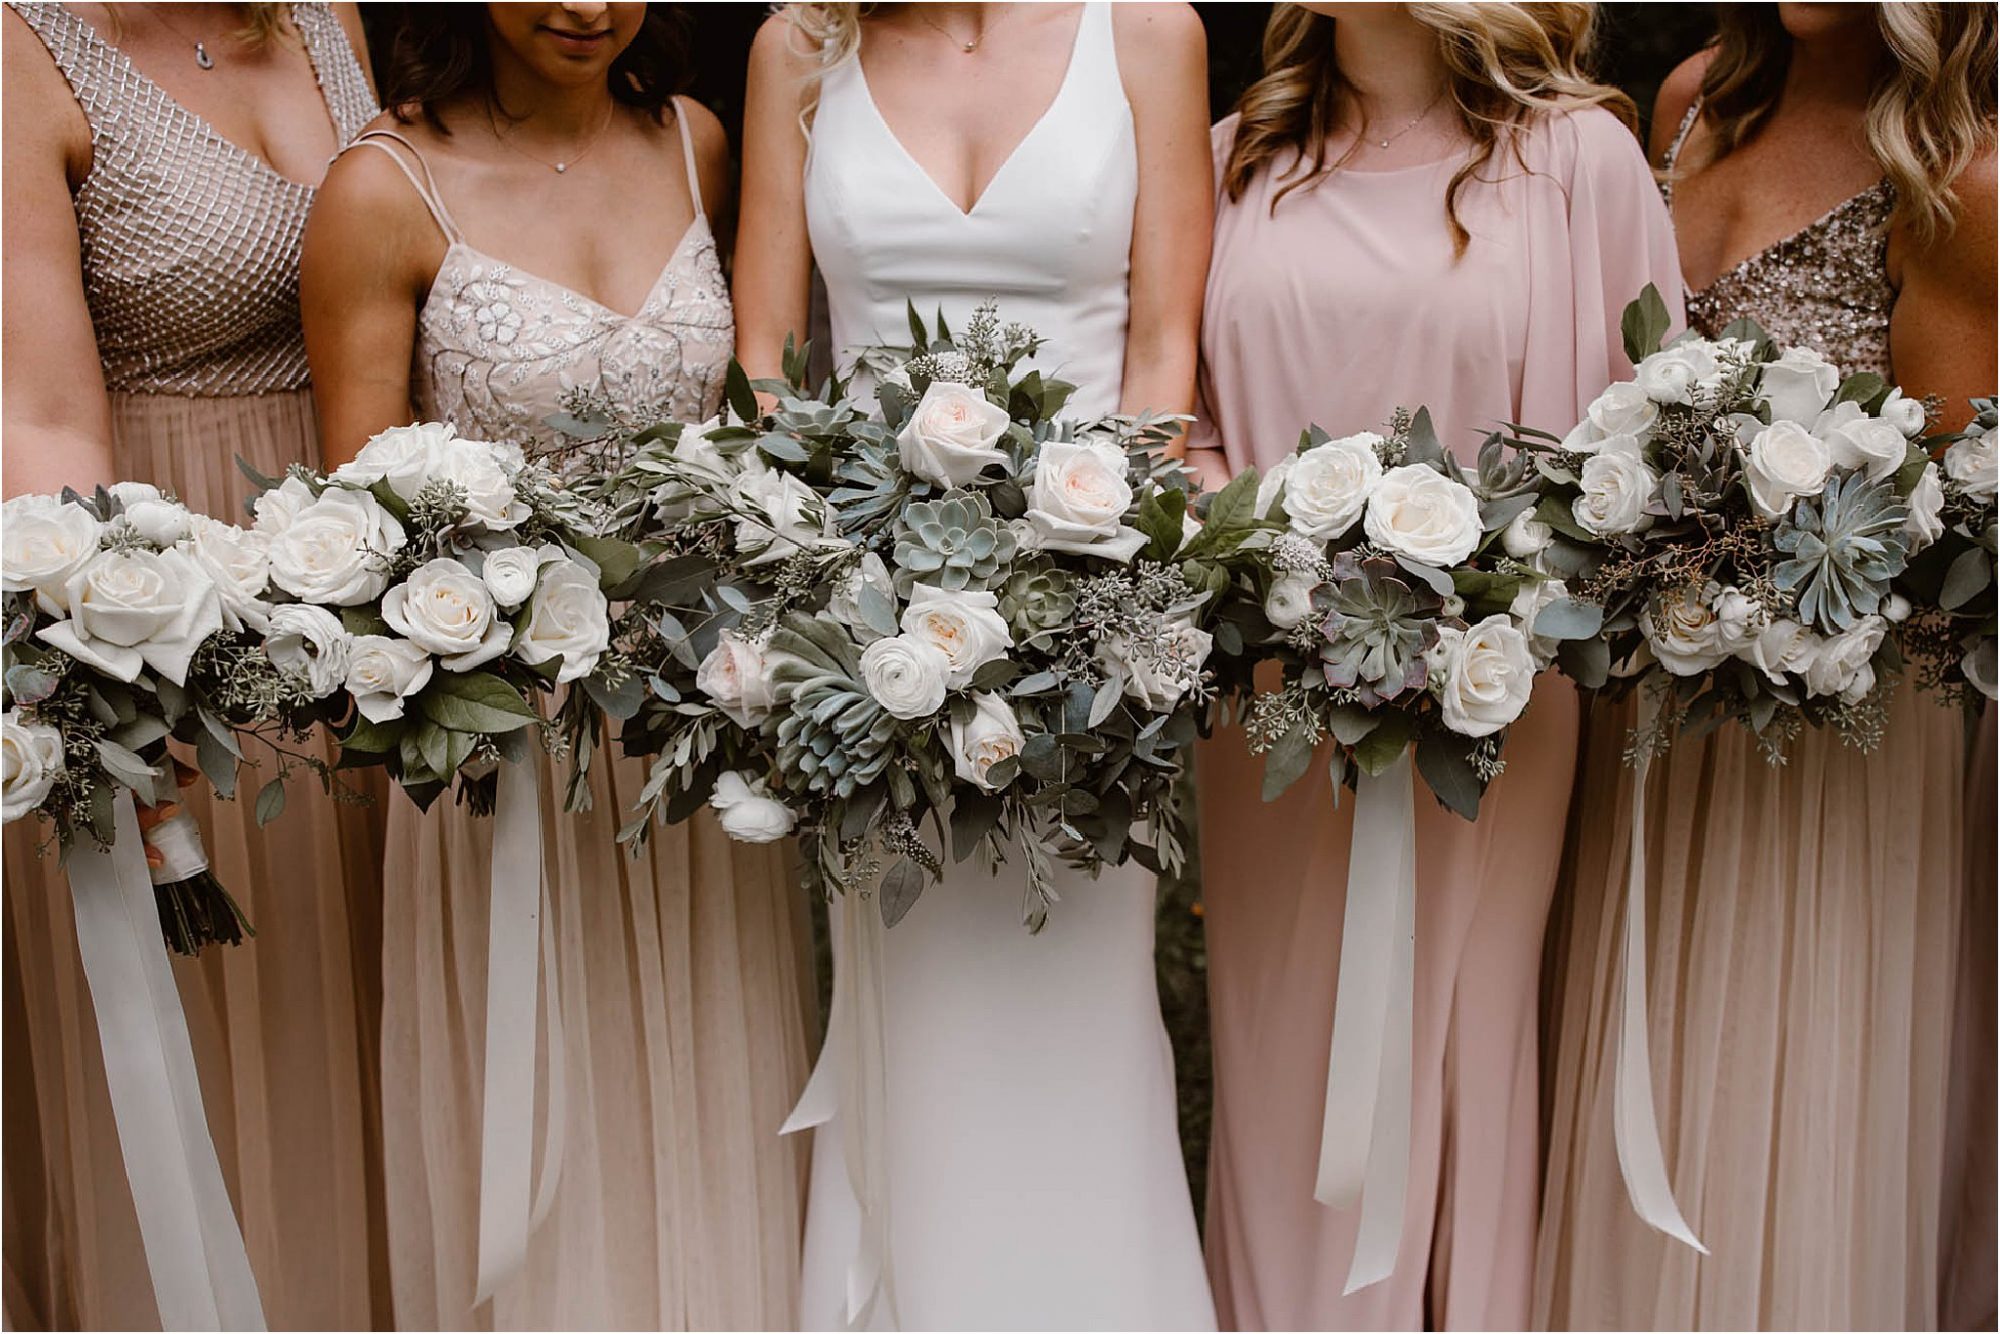 bouquets on wedding day from Melissa Timm